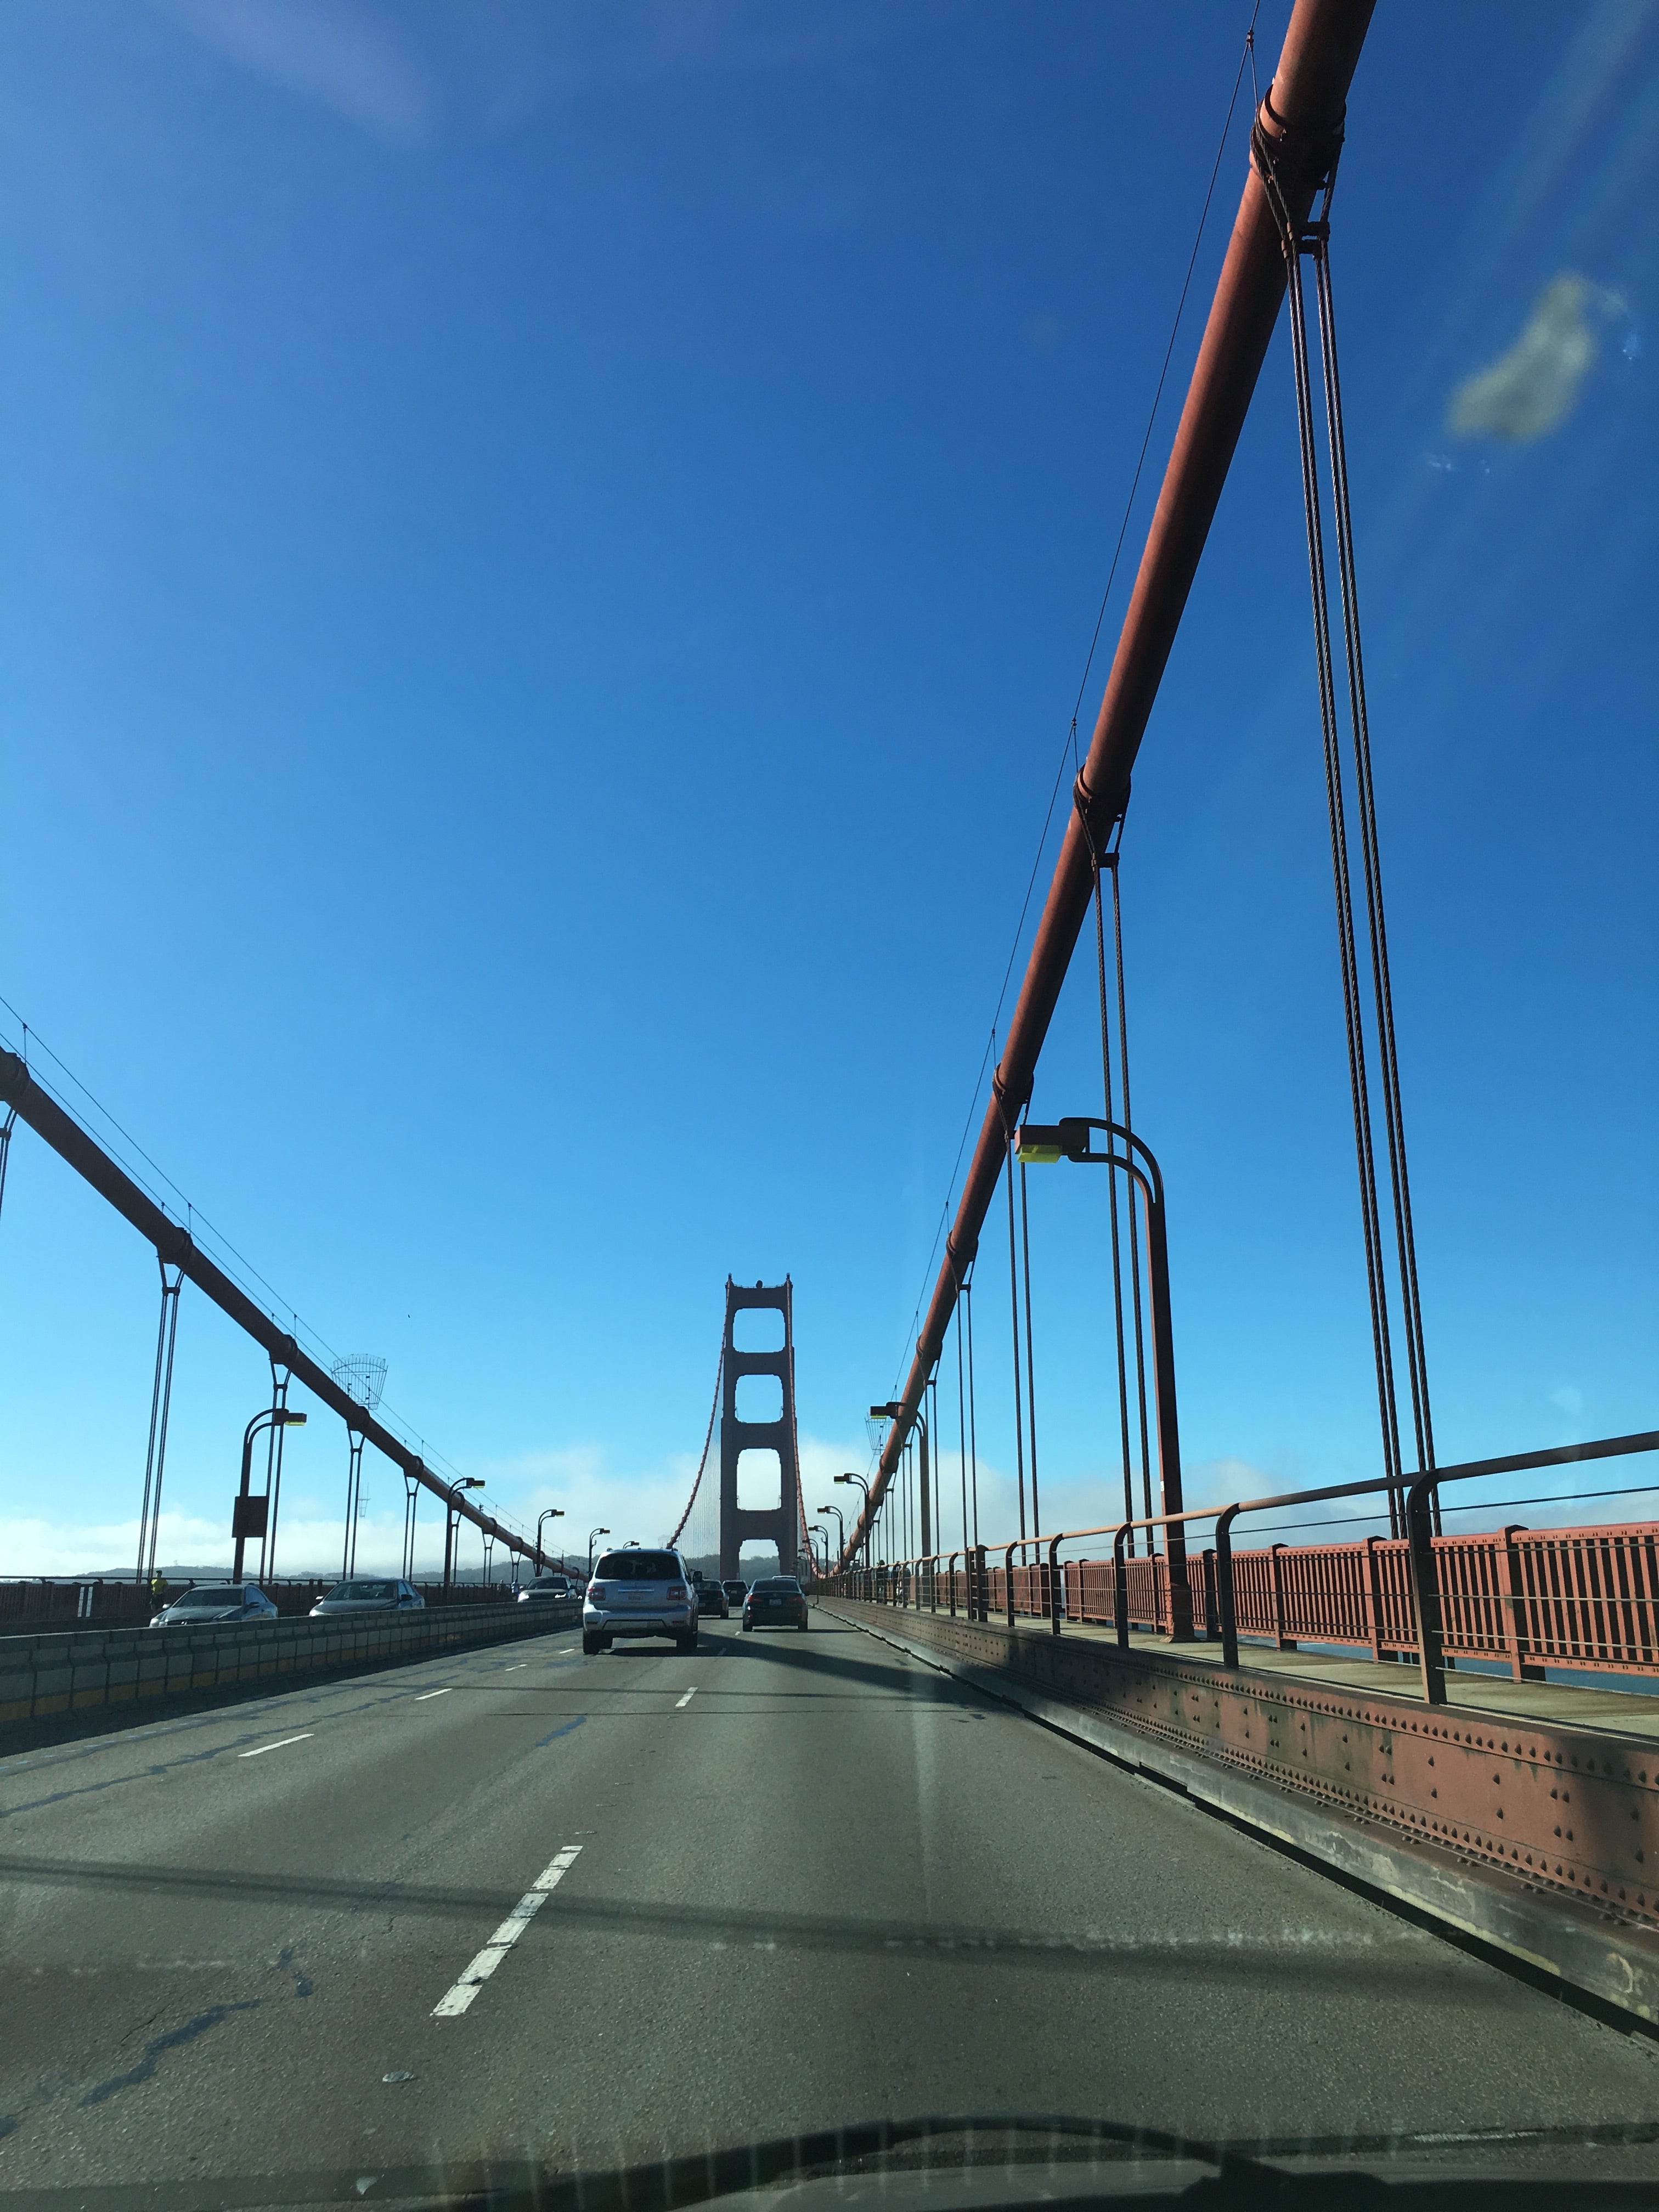 It was a relatively painless drive in to San Francisco